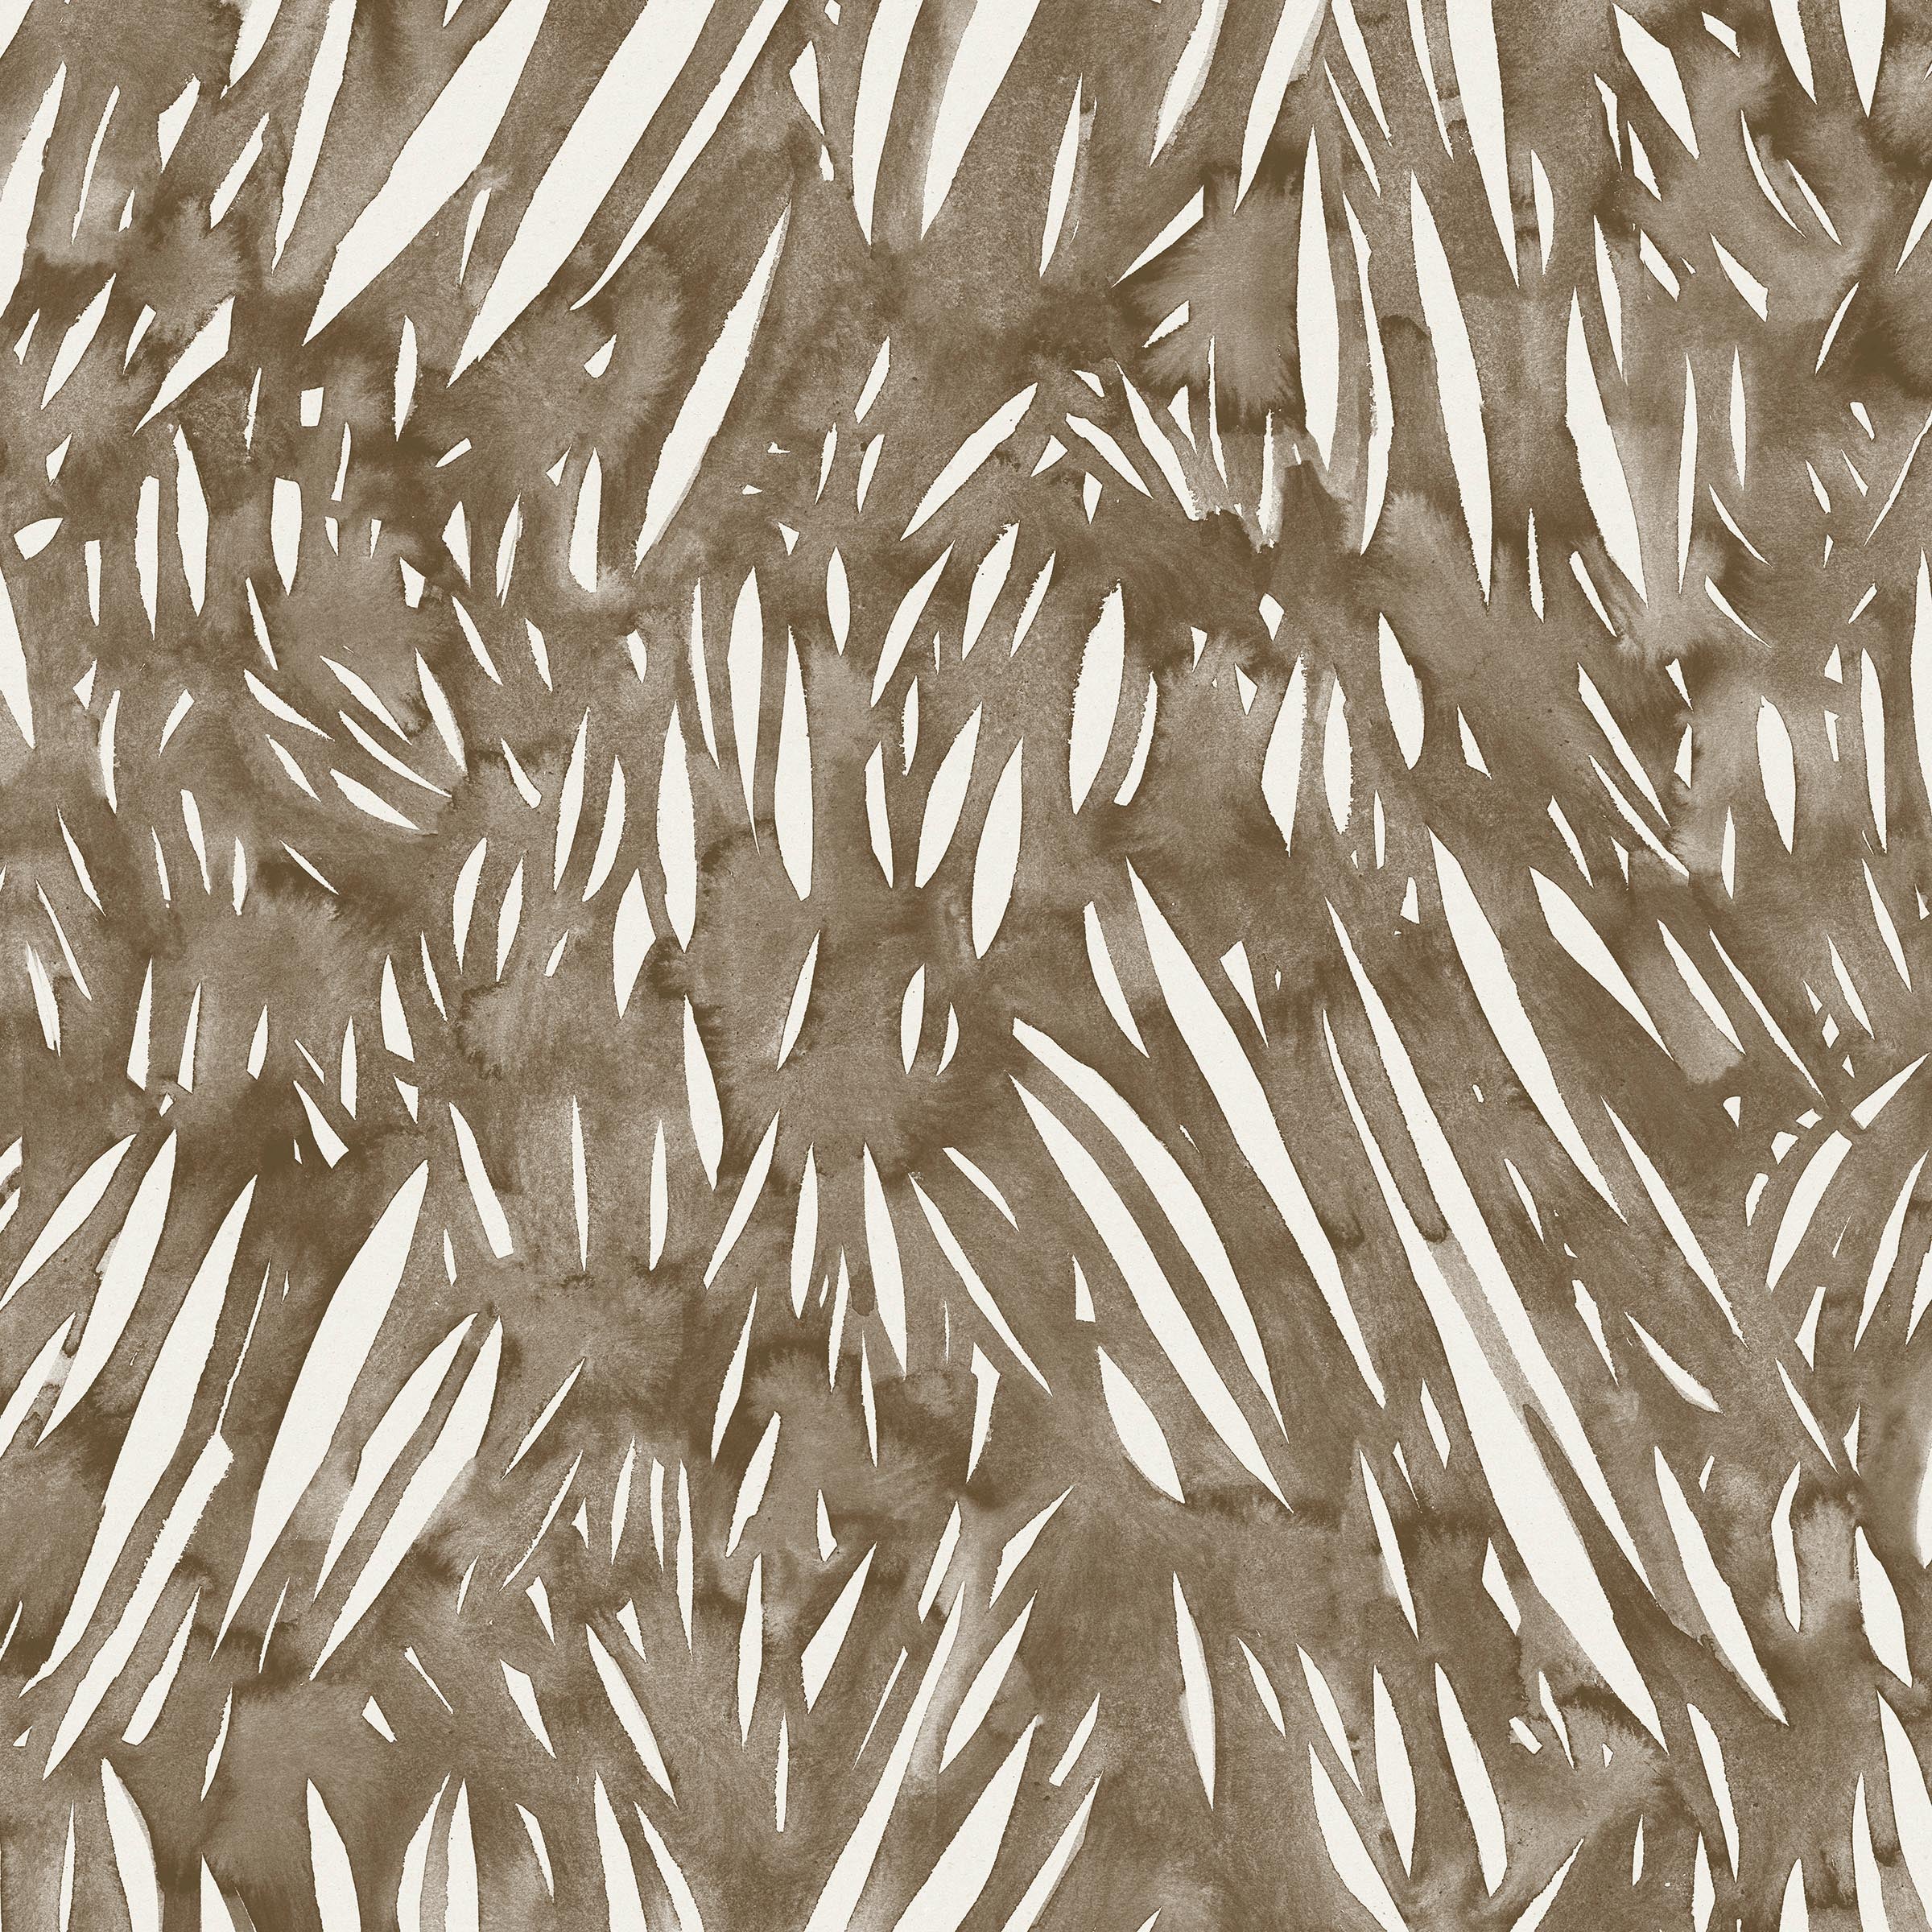 Detail of fabric in an abstract leaf pattern in white on a brown watercolor field.